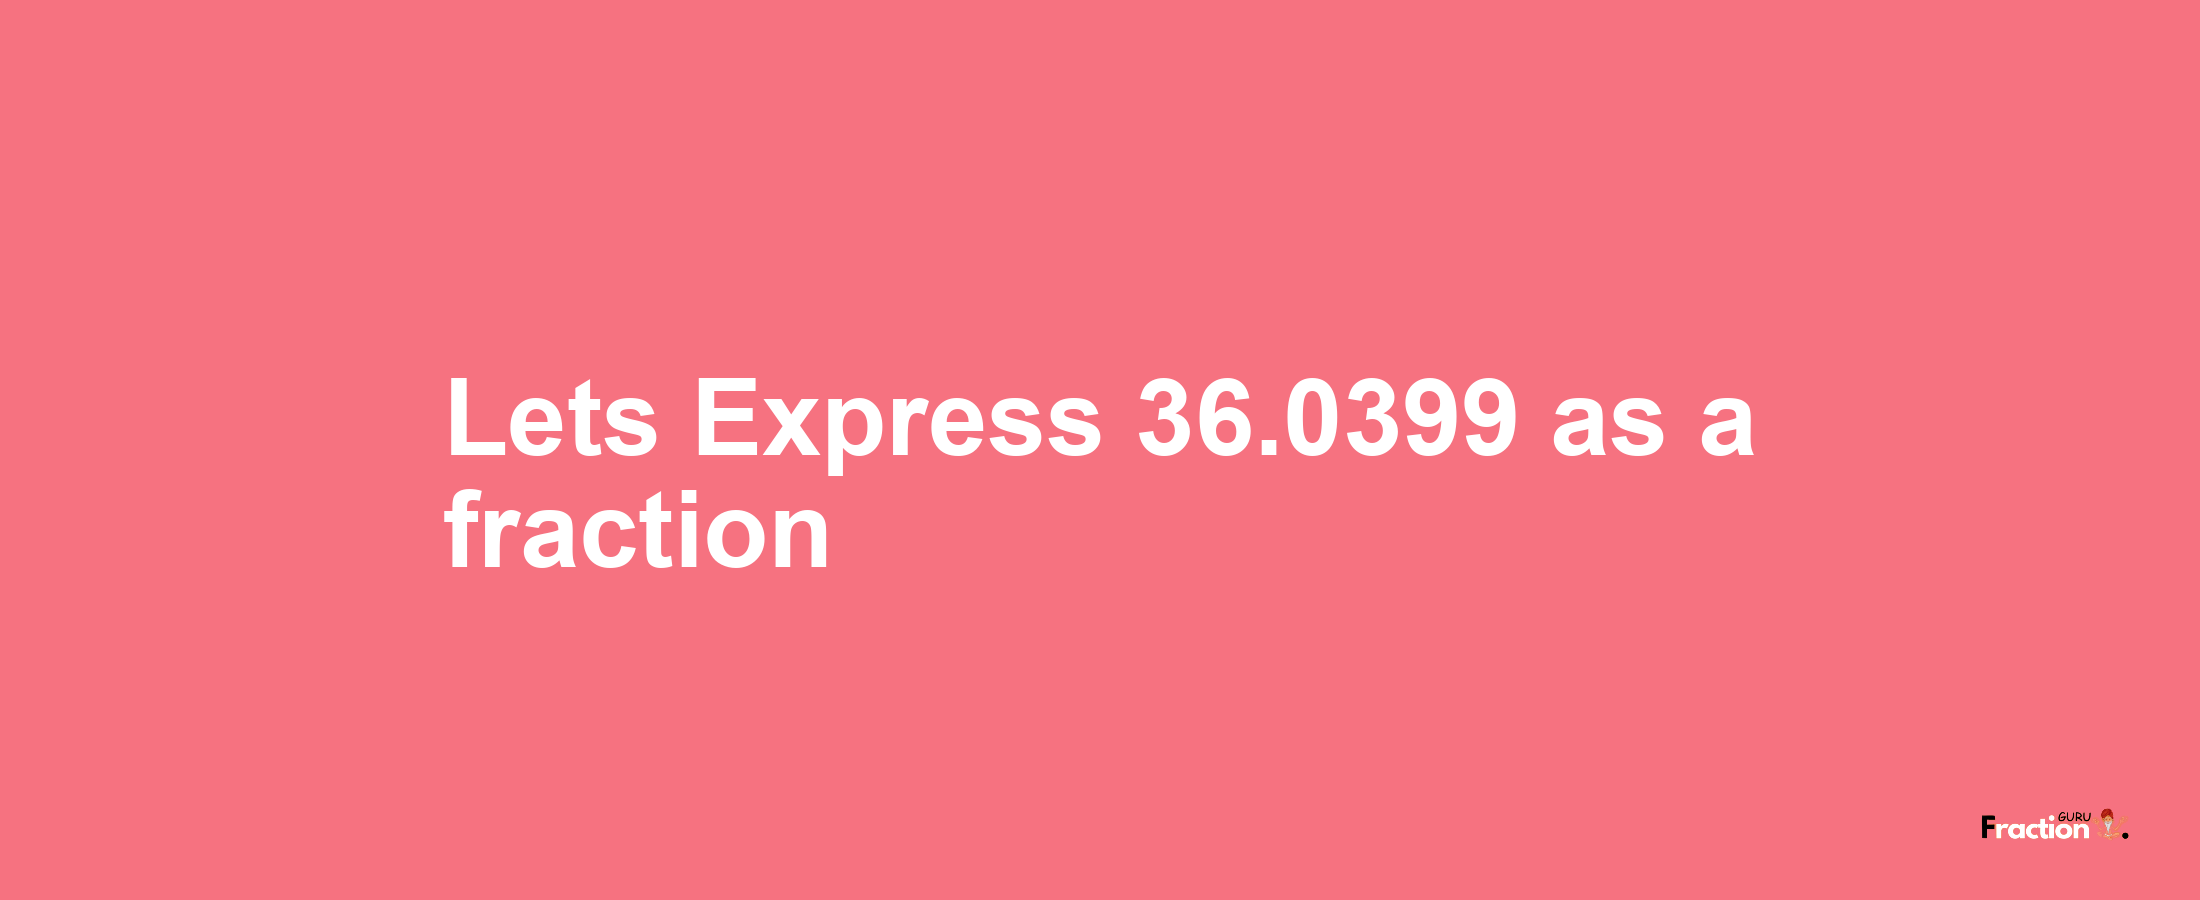 Lets Express 36.0399 as afraction